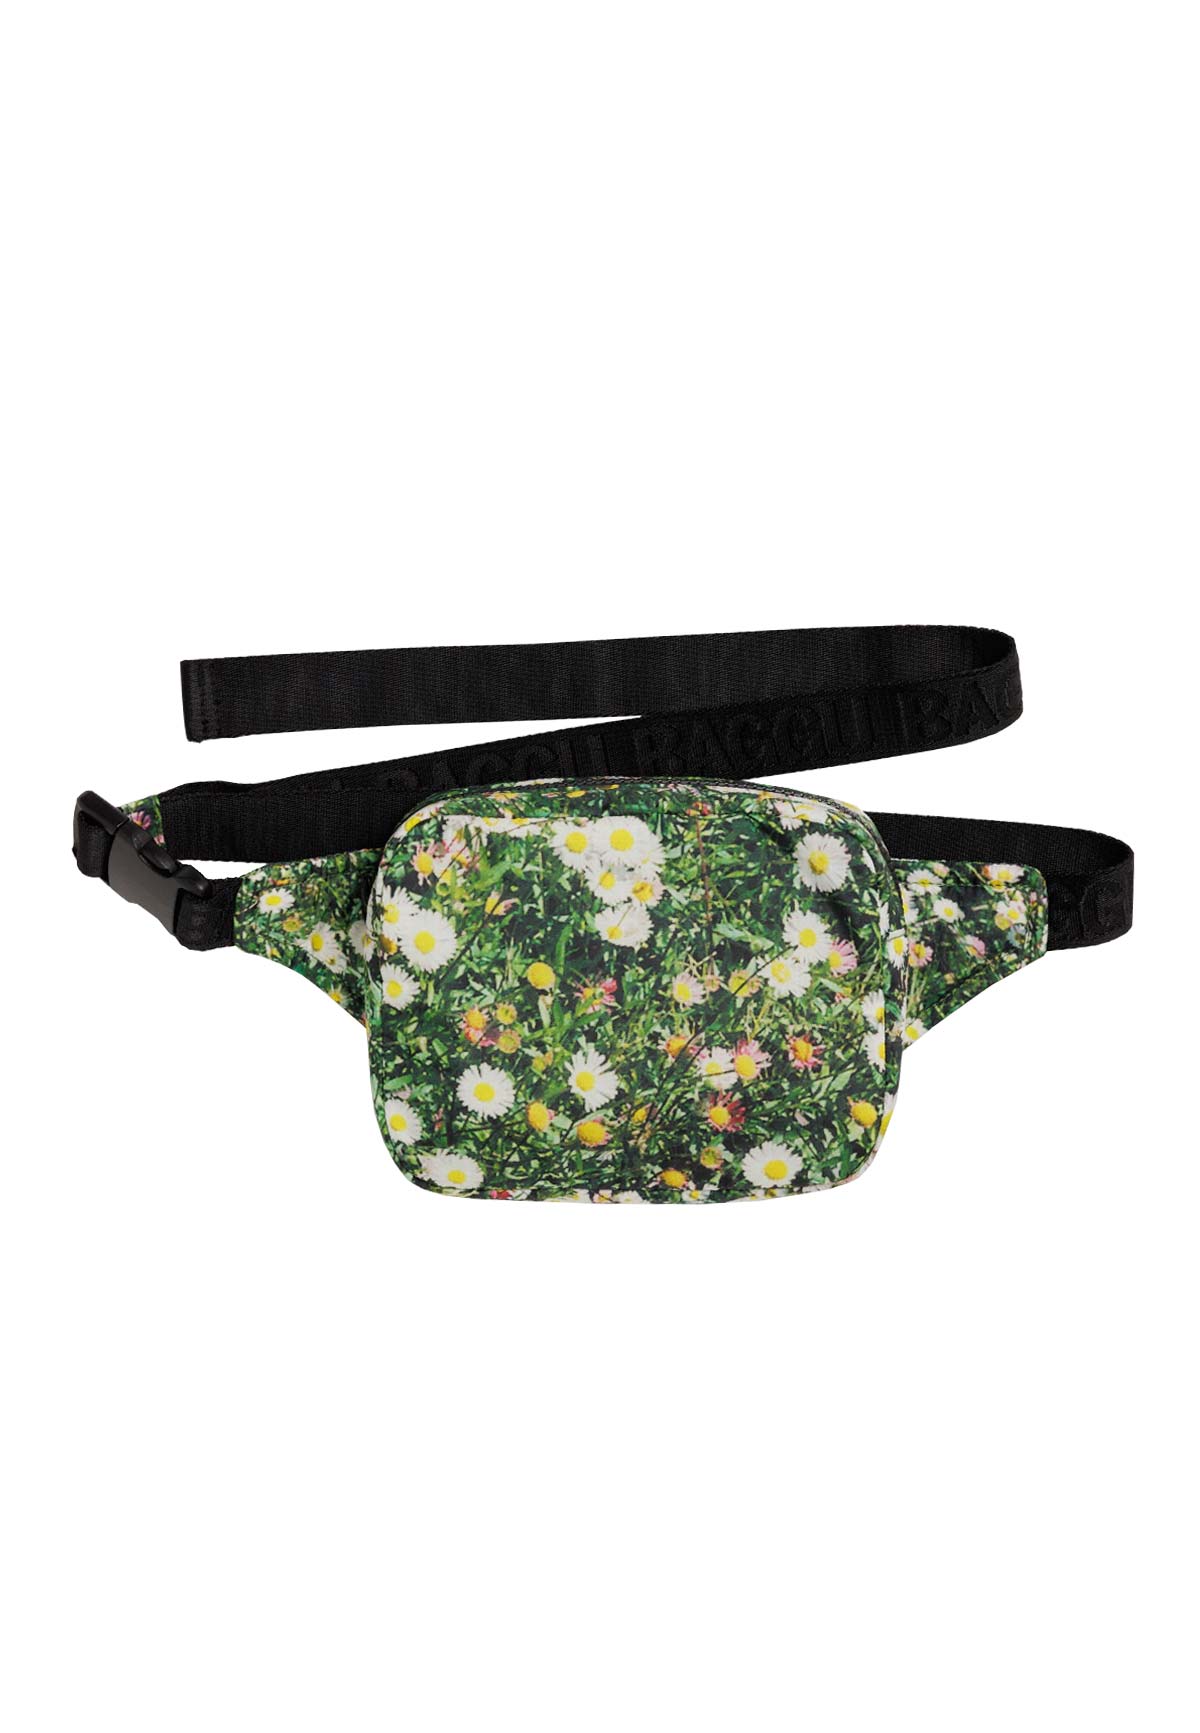 PUFFY FANNY PACK - Moeon